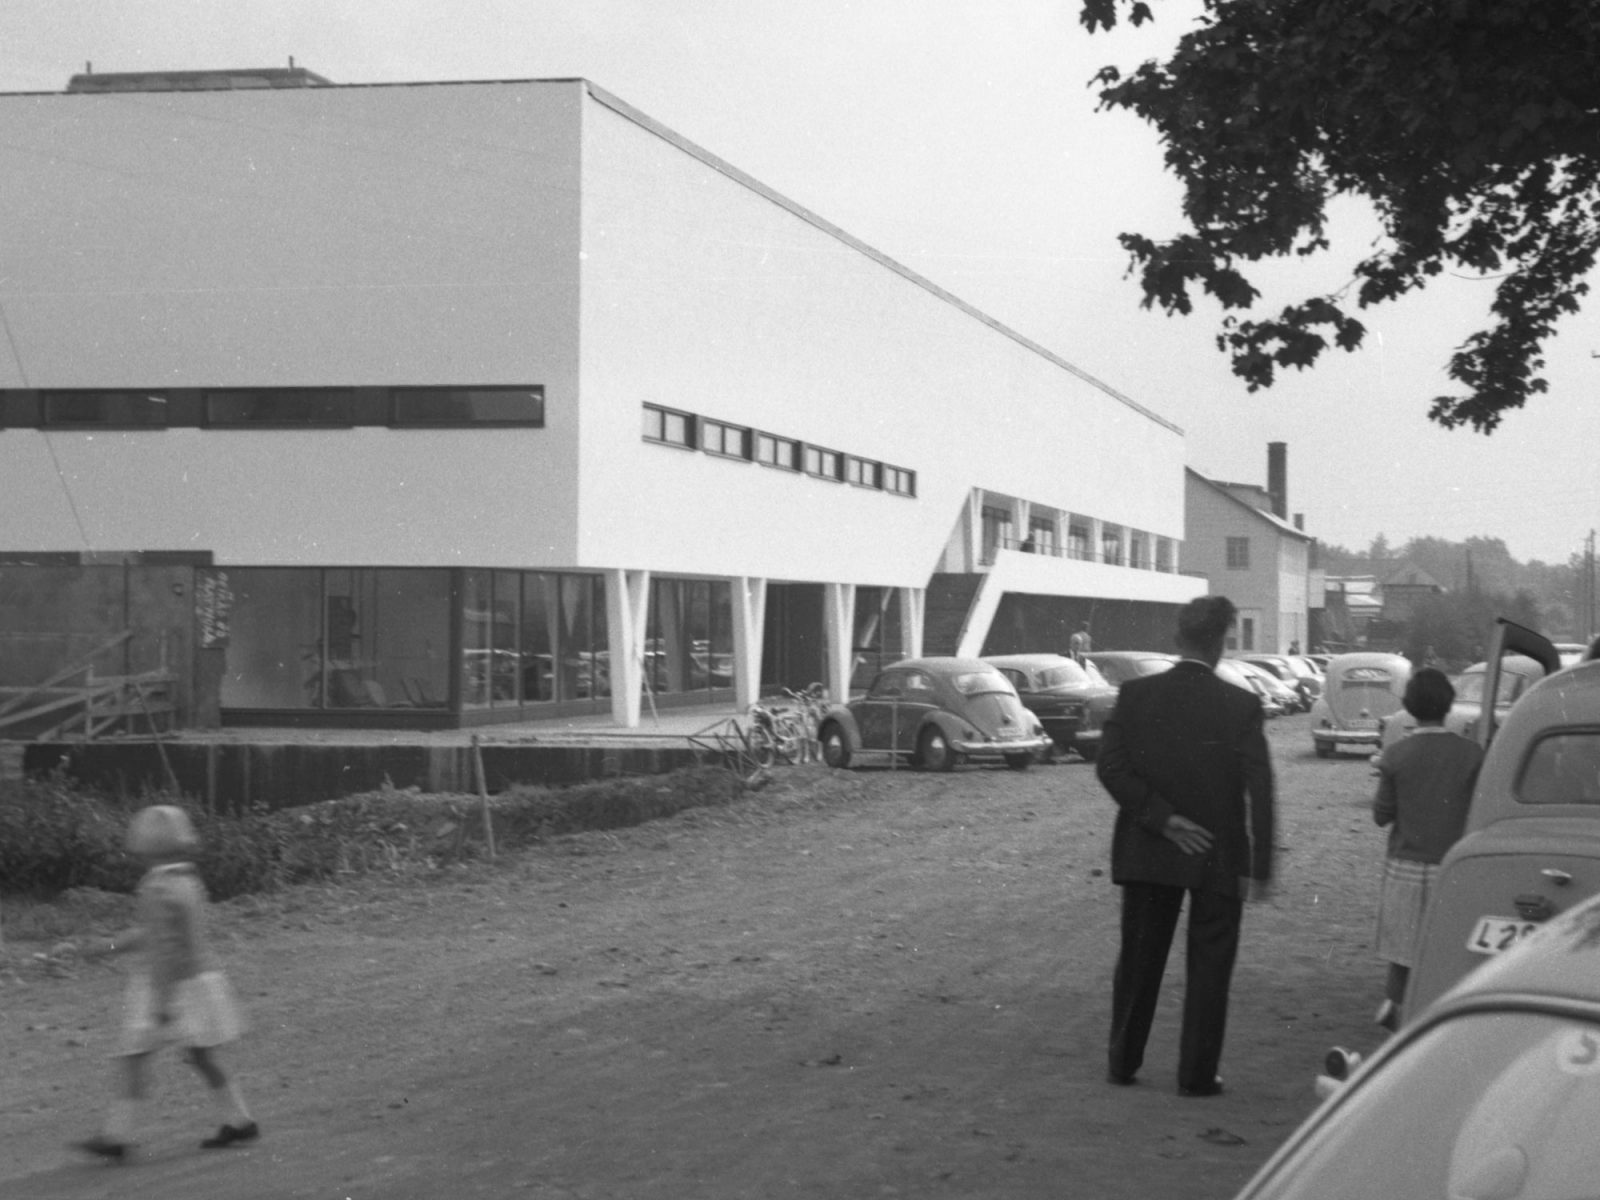 Family in 1950s style clothes step out of their car in front of large white modernist building, the first IKEA store.